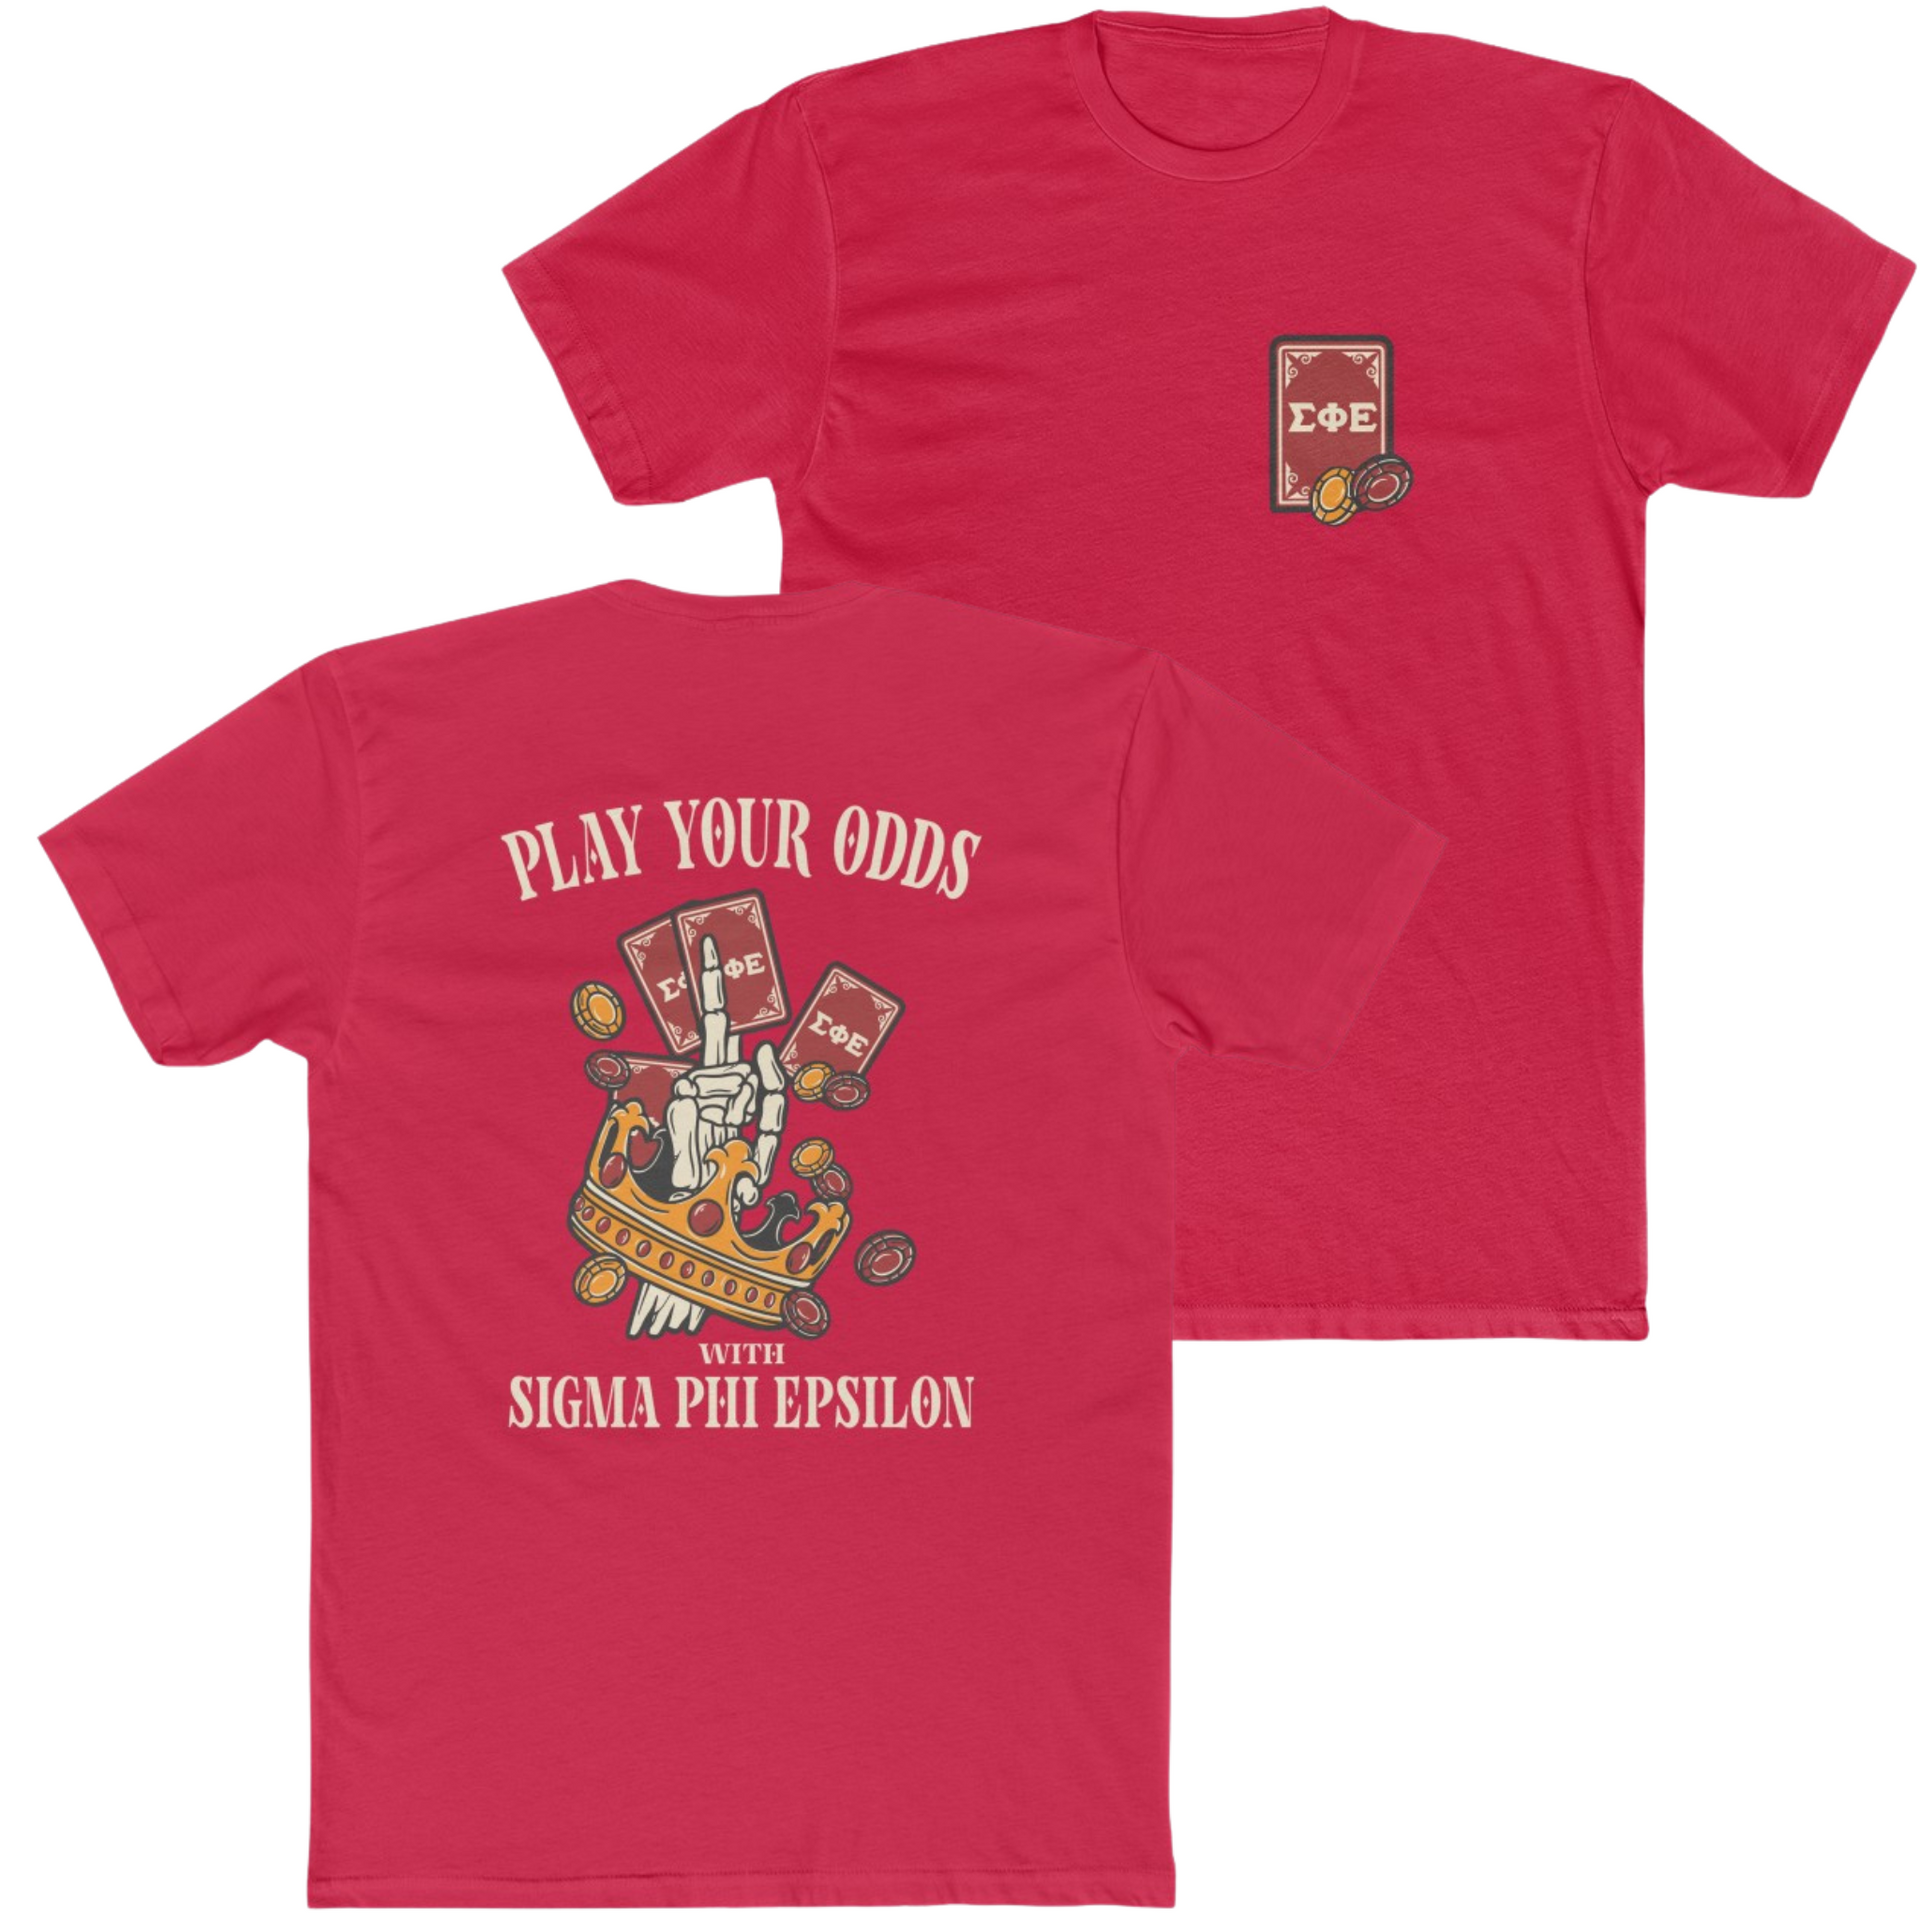 Red Sigma Phi Epsilon Graphic T-Shirt | Play Your Odds | SigEp Clothing - Campus Apparel